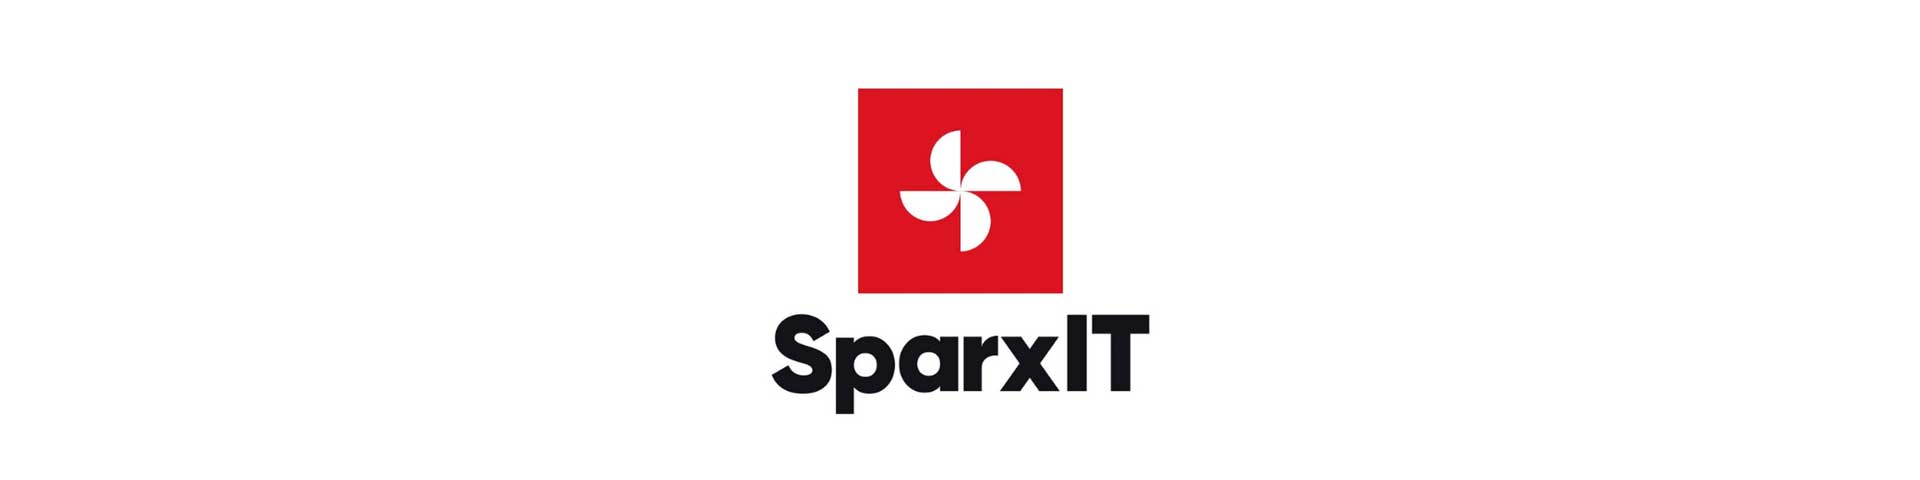 Sparx IT Solutions